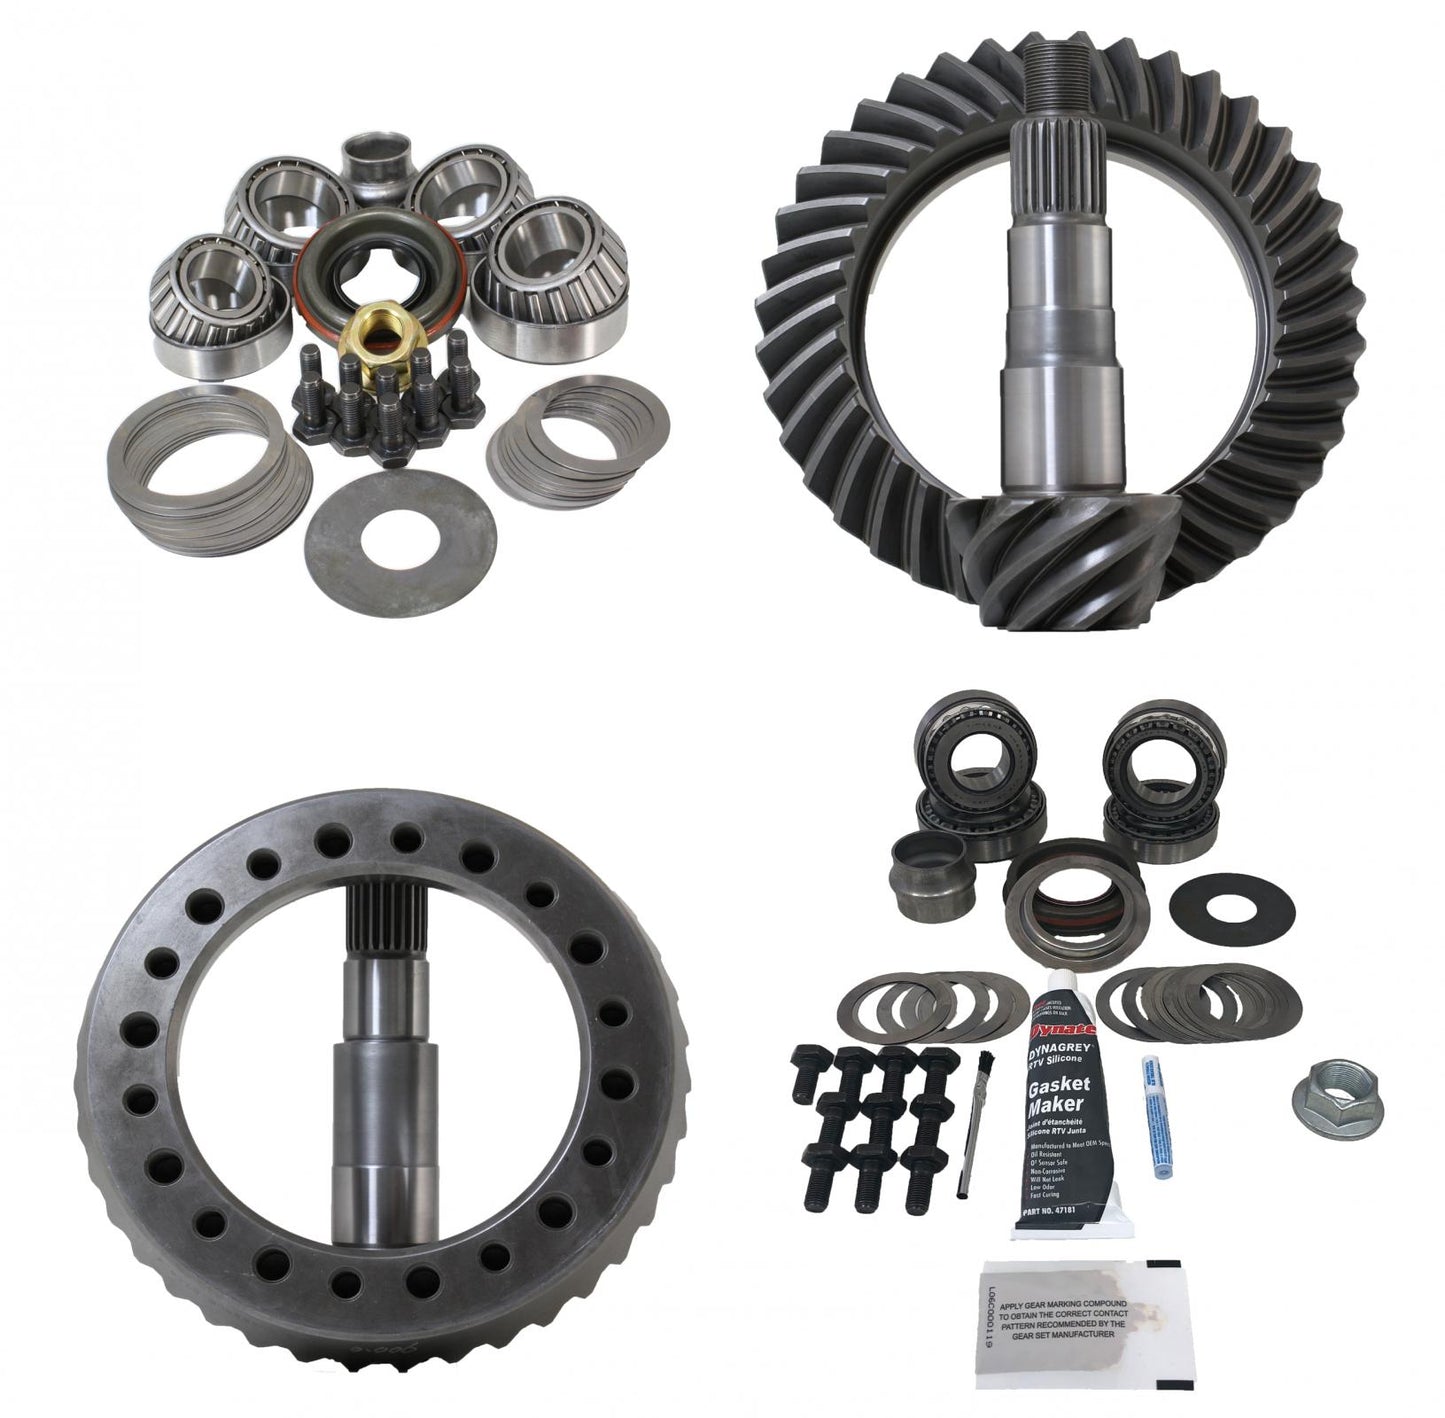 Jeep TJ Rubicon 4.88 Ratio Gear Package (D44Thick-D44Thick) with Timken Bearings. Comes with D44 Thick Gears, no Carrier Change Needed Revolution Gear and Axle